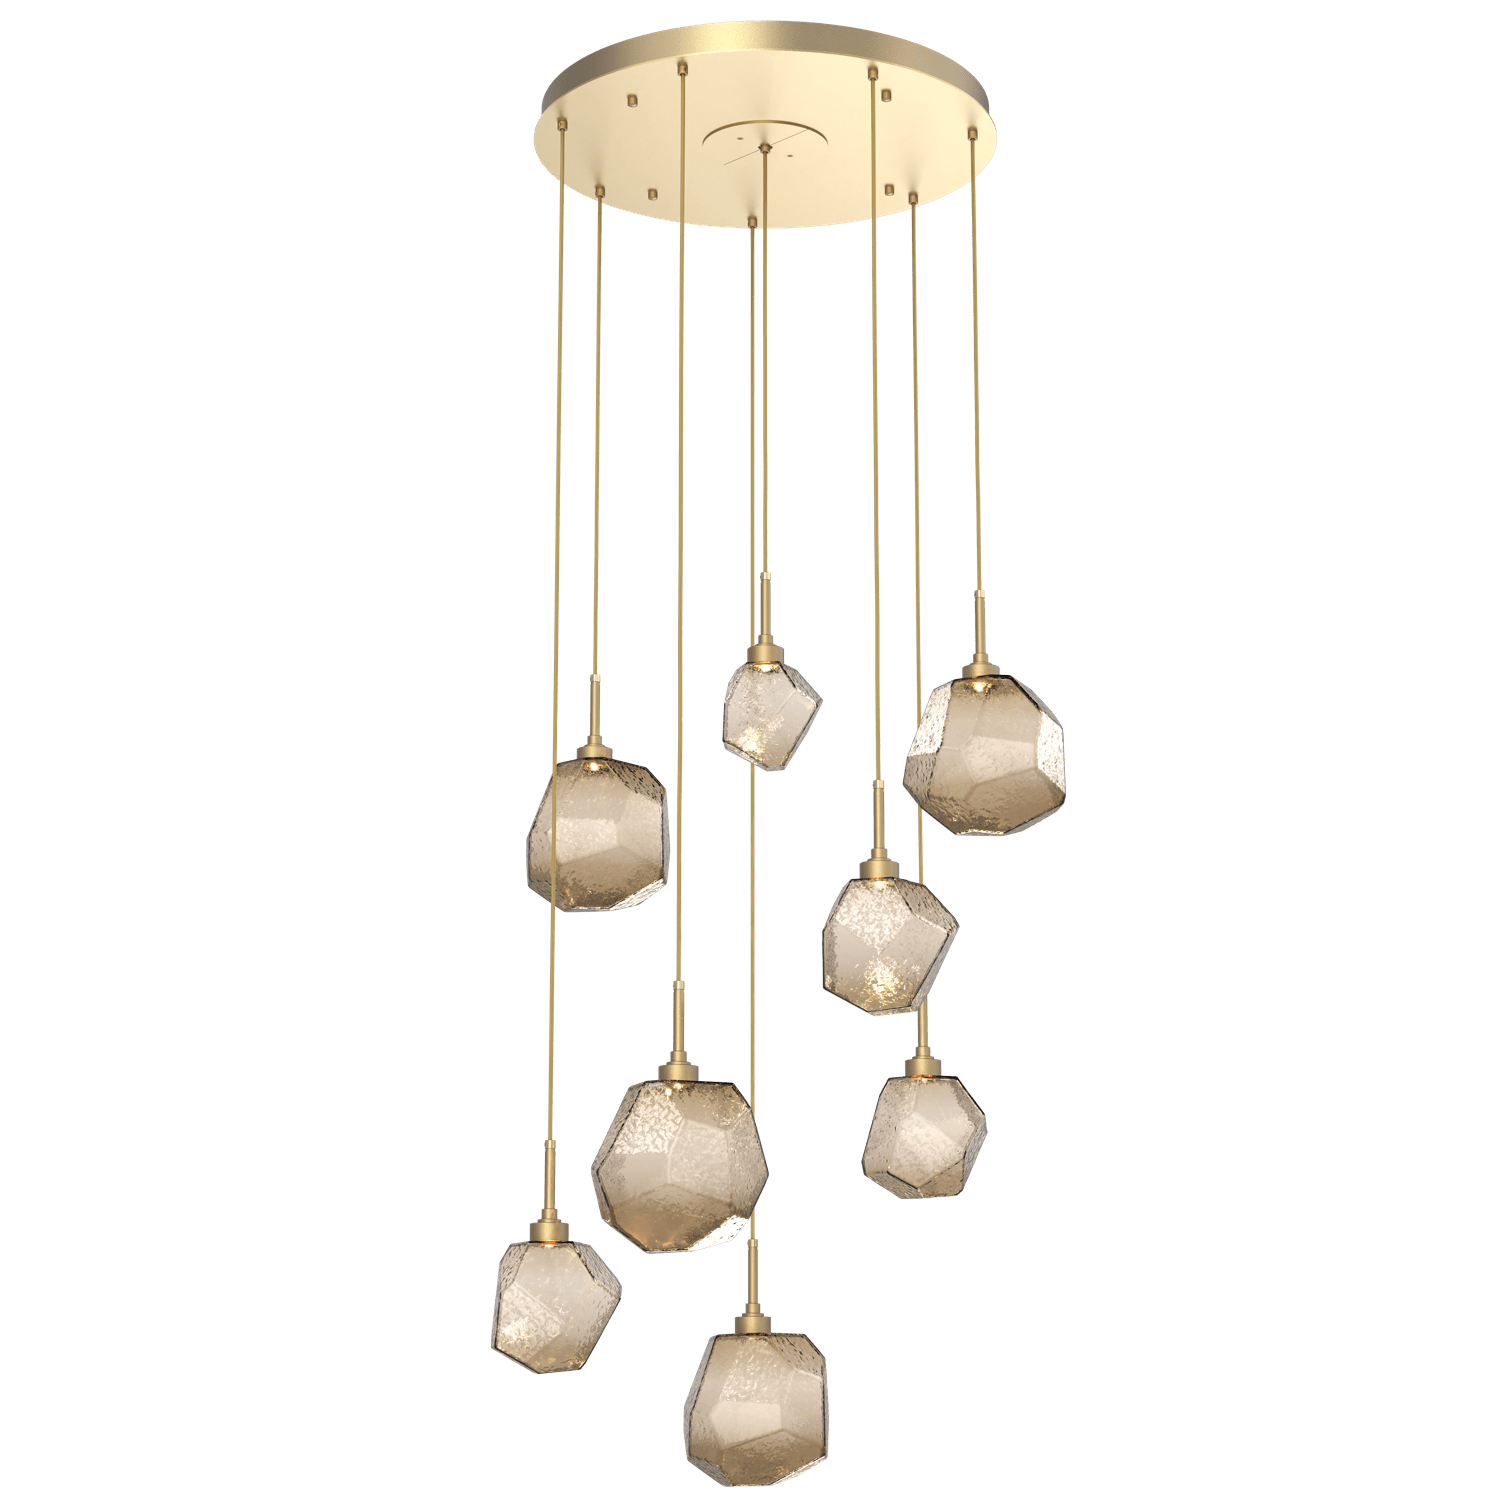 CHB0039-08-GB-B-Hammerton-Studio-Gem-8-light-round-pendant-chandelier-with-gilded-brass-finish-and-bronze-blown-glass-shades-and-LED-lamping